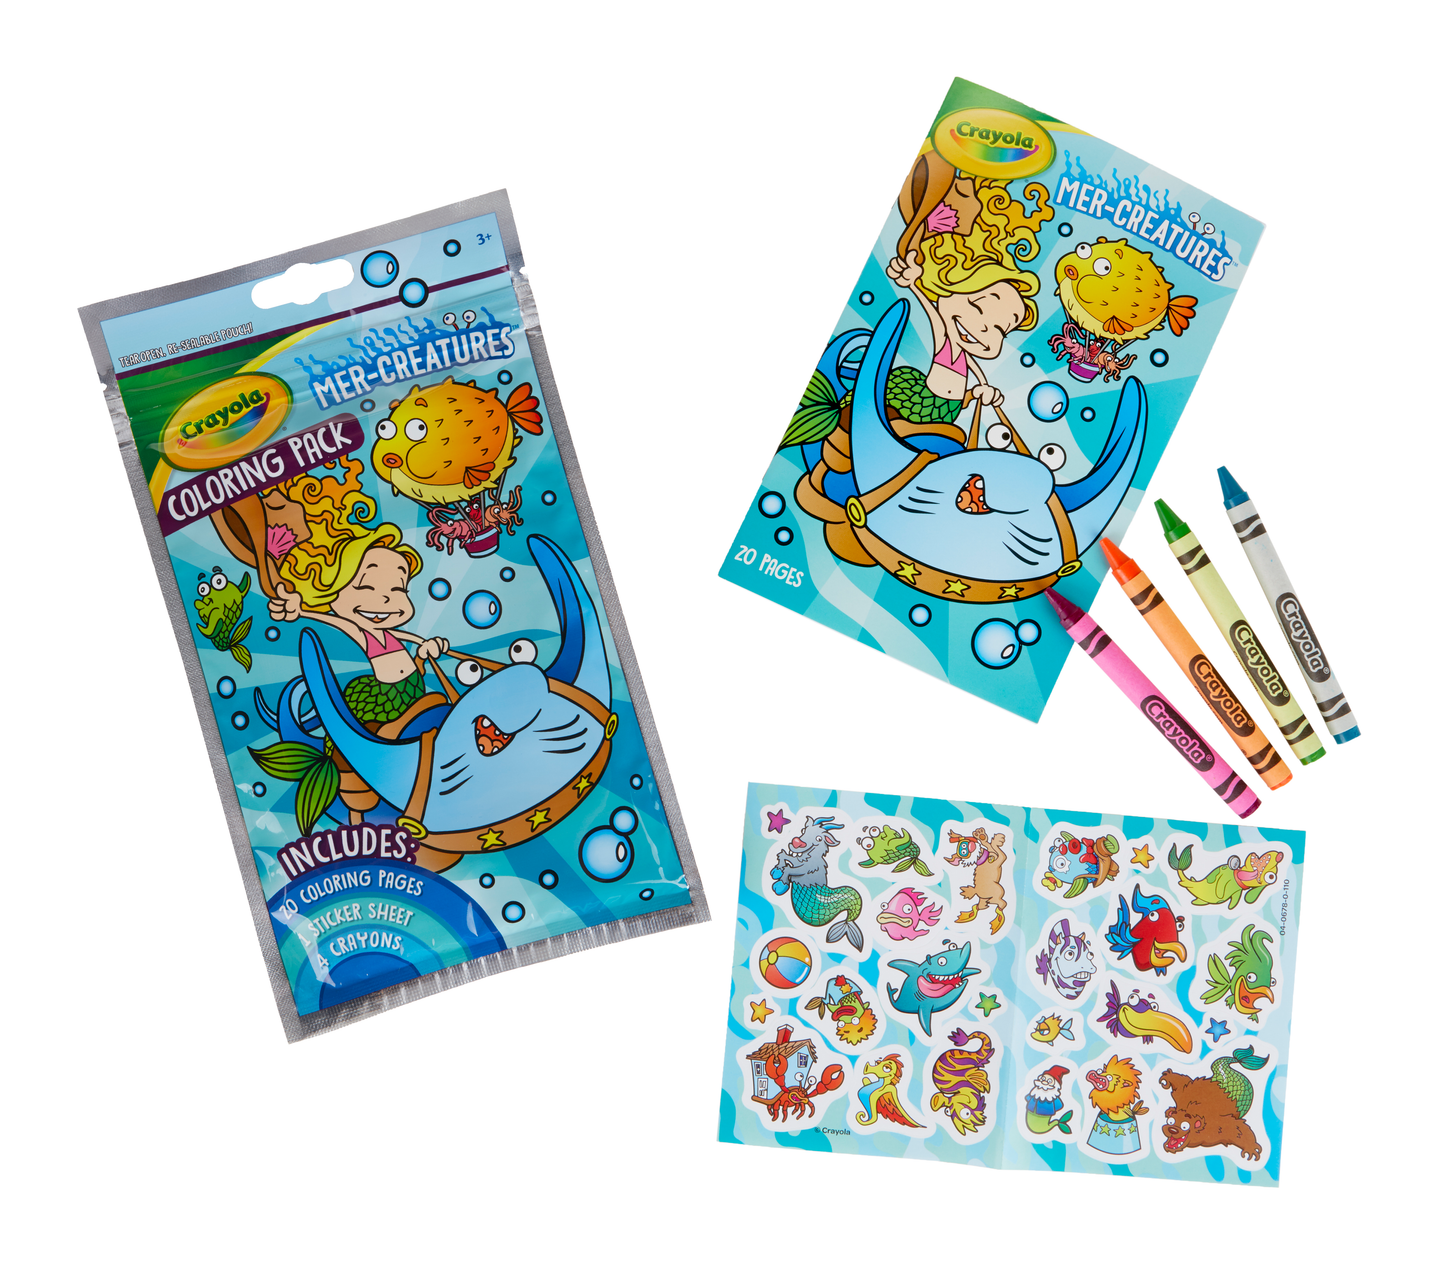 Coloring Pack With Crayons Mer Creatures